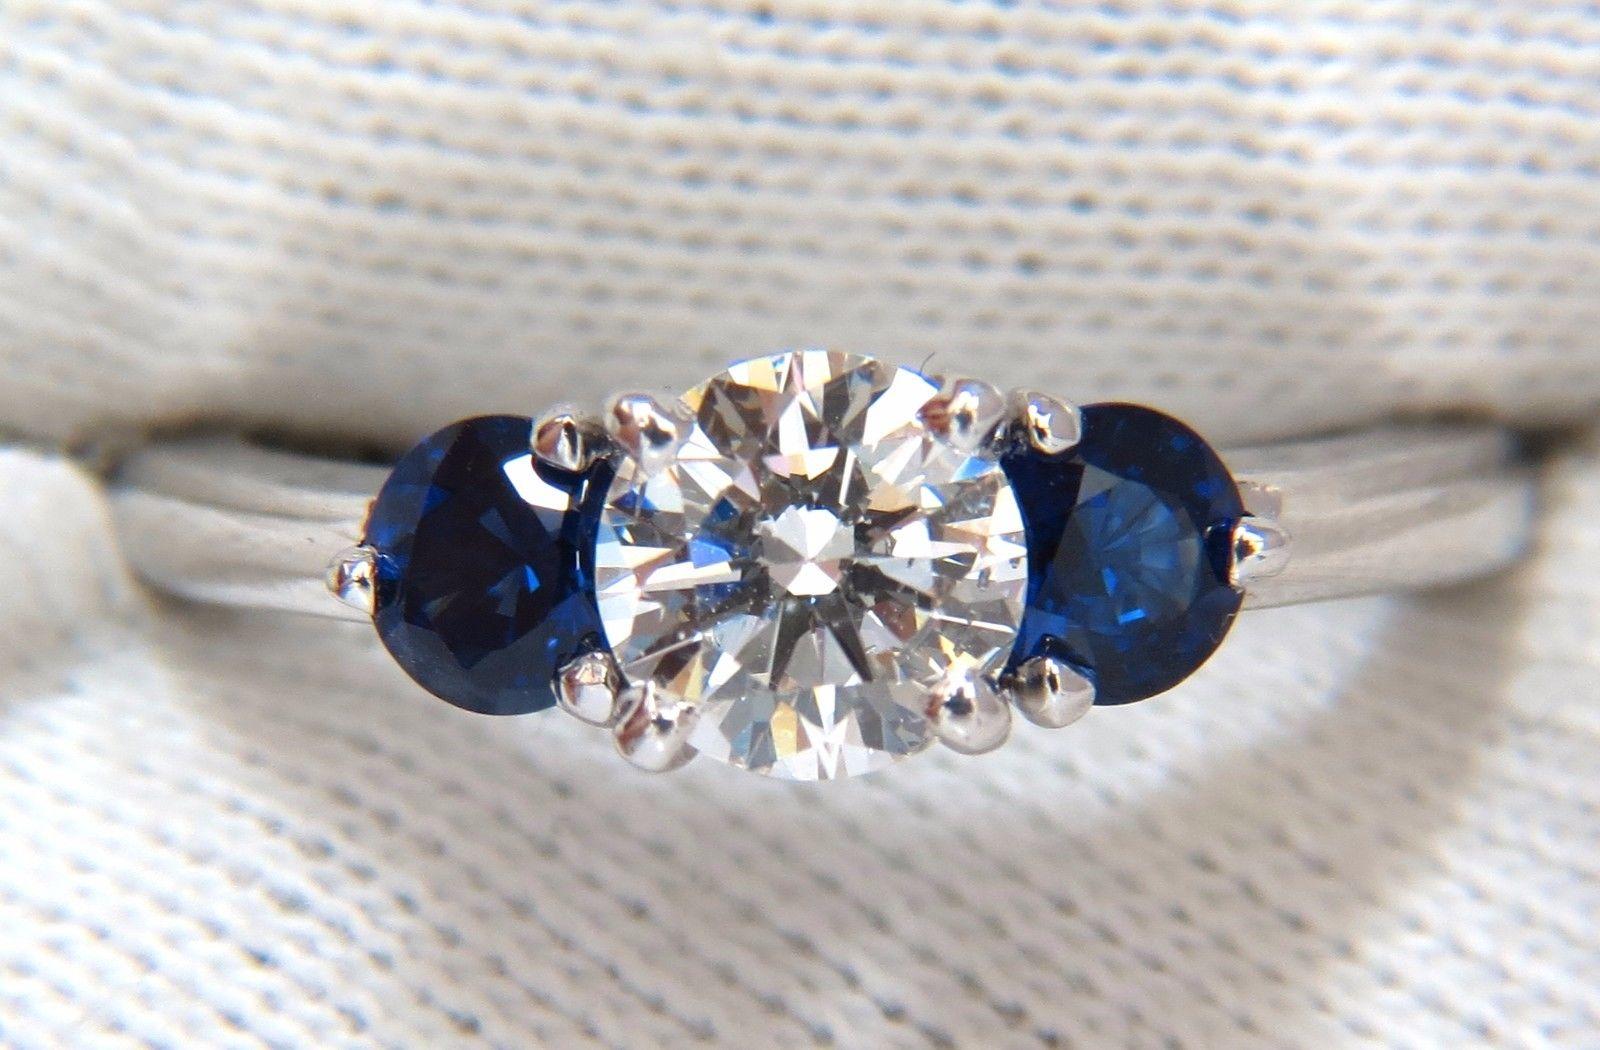 Classic Diamond & Sapphires, Three Stone

.77ct. Round Cut diamond

Full Cut Brilliant

G-color Si-1 Clarity

5.98mm



Side Round Natural Blue Sapphires: .80ct. 

Vibrant Royal Blue & transparent

Full cut and Full Faceted.

Gorgeous three stone